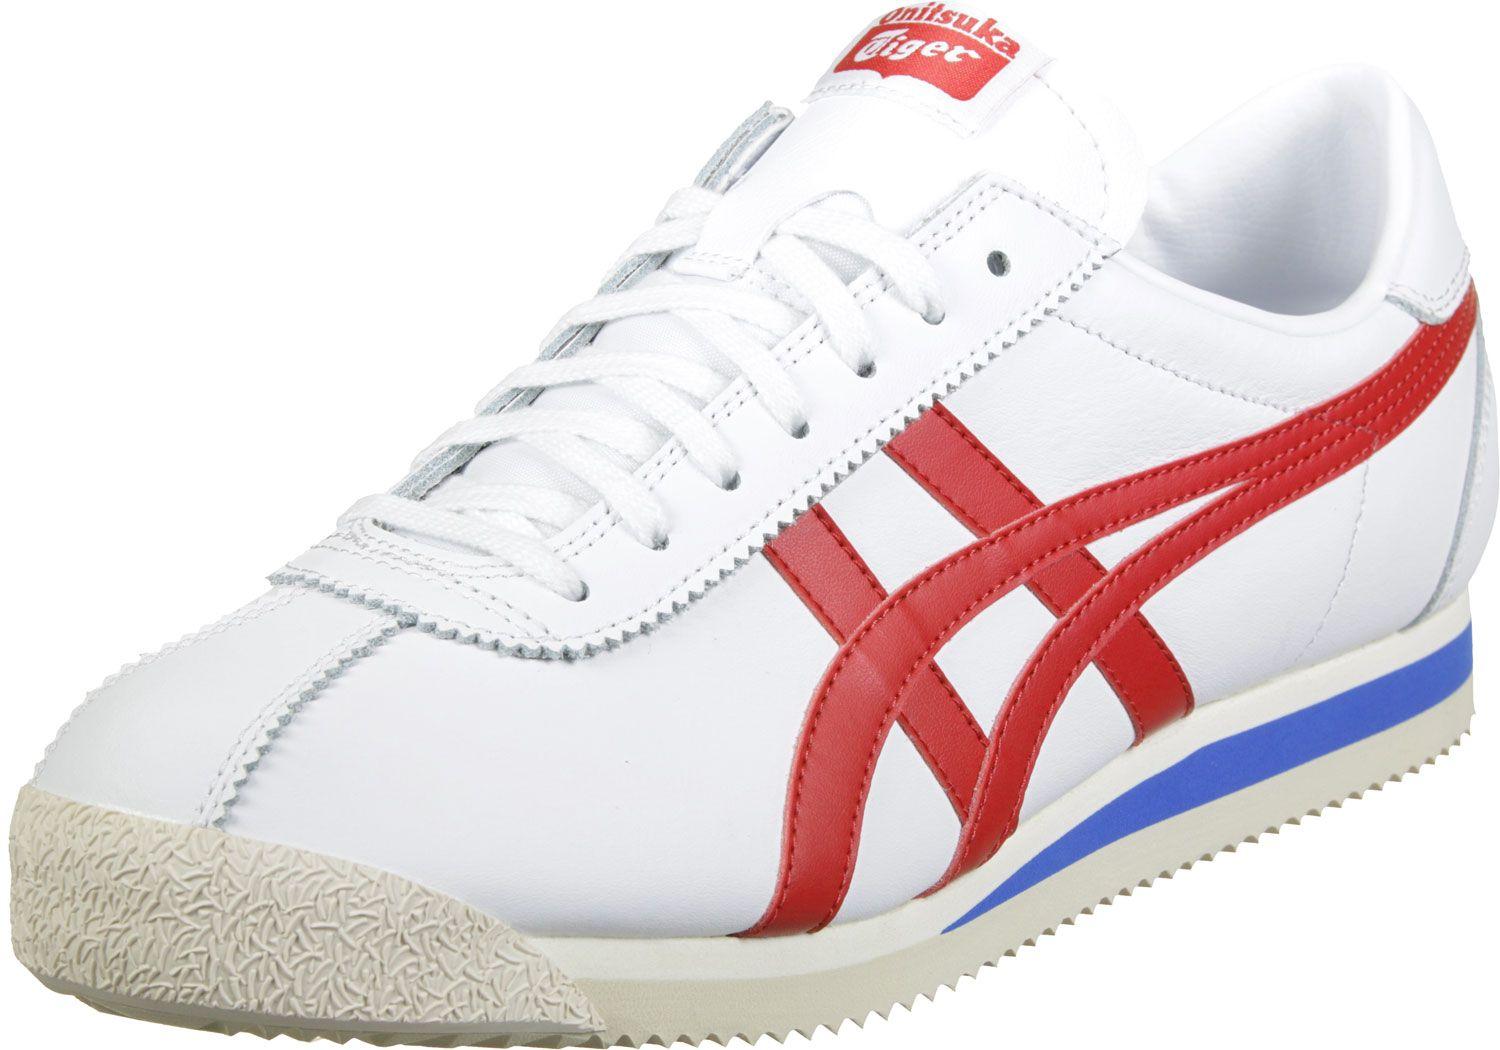 Red and Blue Tiger Logo - Onitsuka Tiger Tiger Corsair shoes white red blue | WeAre Shop